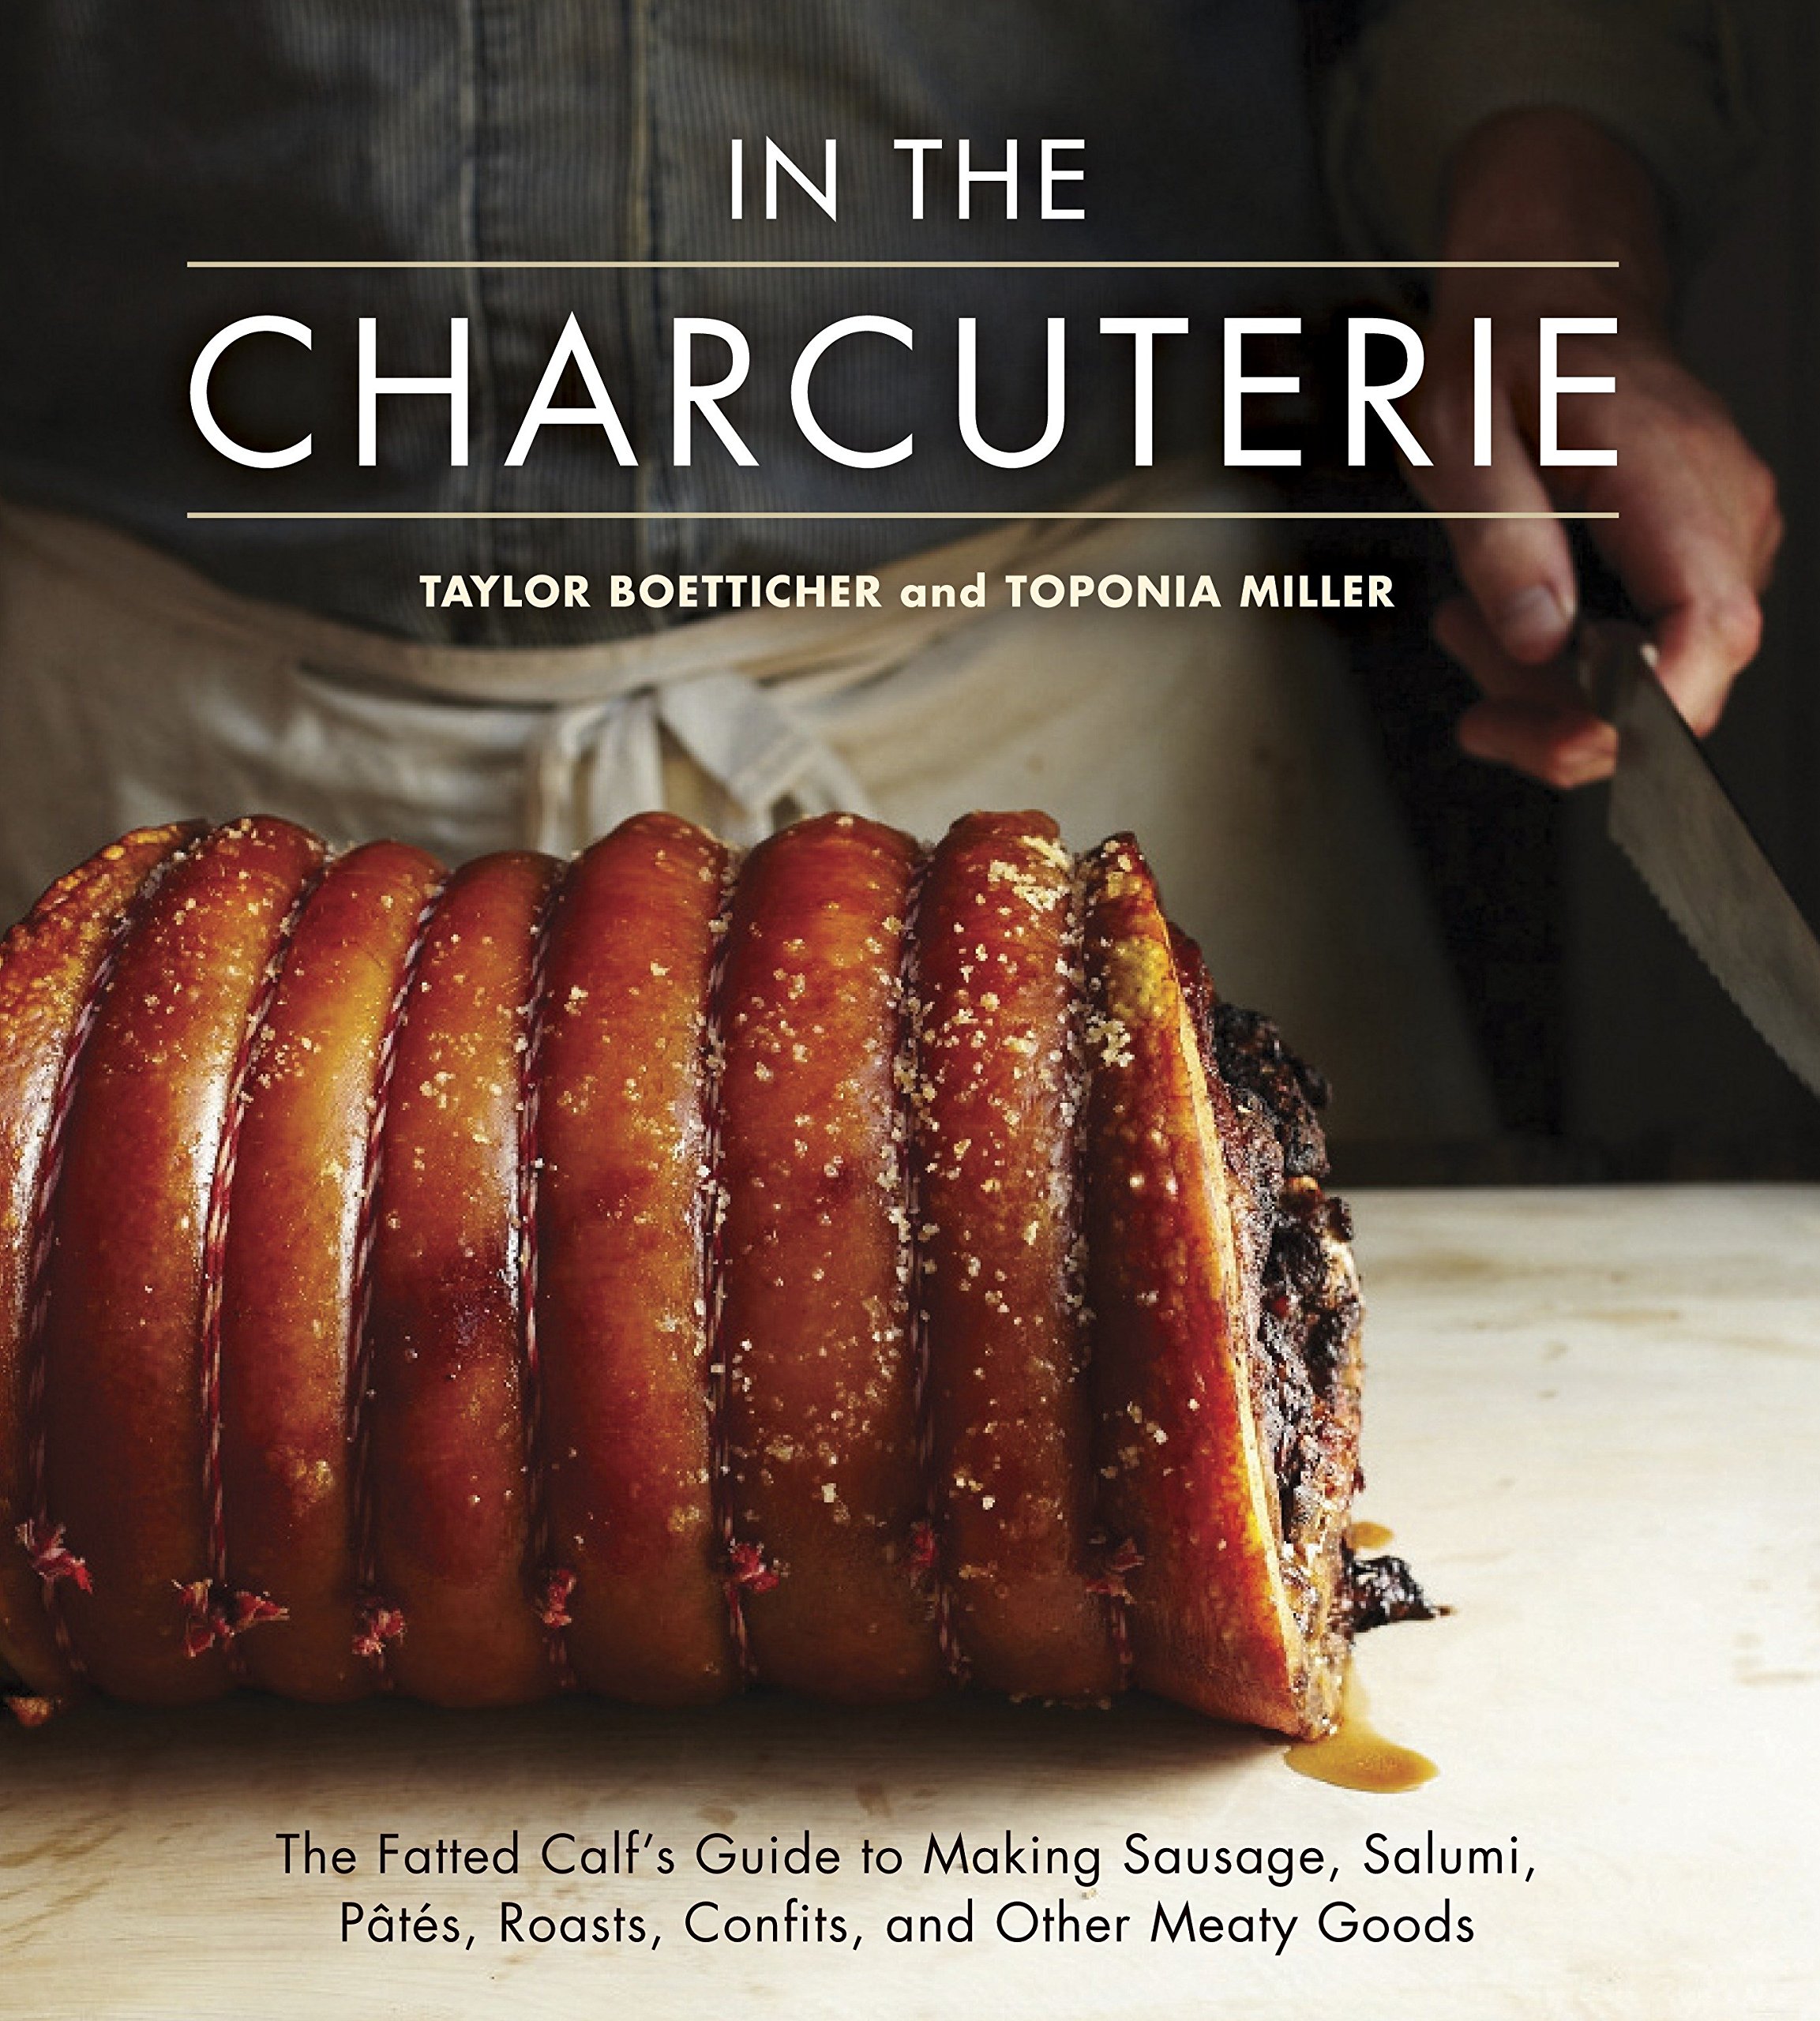 Book Cover In The Charcuterie: The Fatted Calf's Guide to Making Sausage, Salumi, Pates, Roasts, Confits, and Other Meaty Goods [A Cookbook]